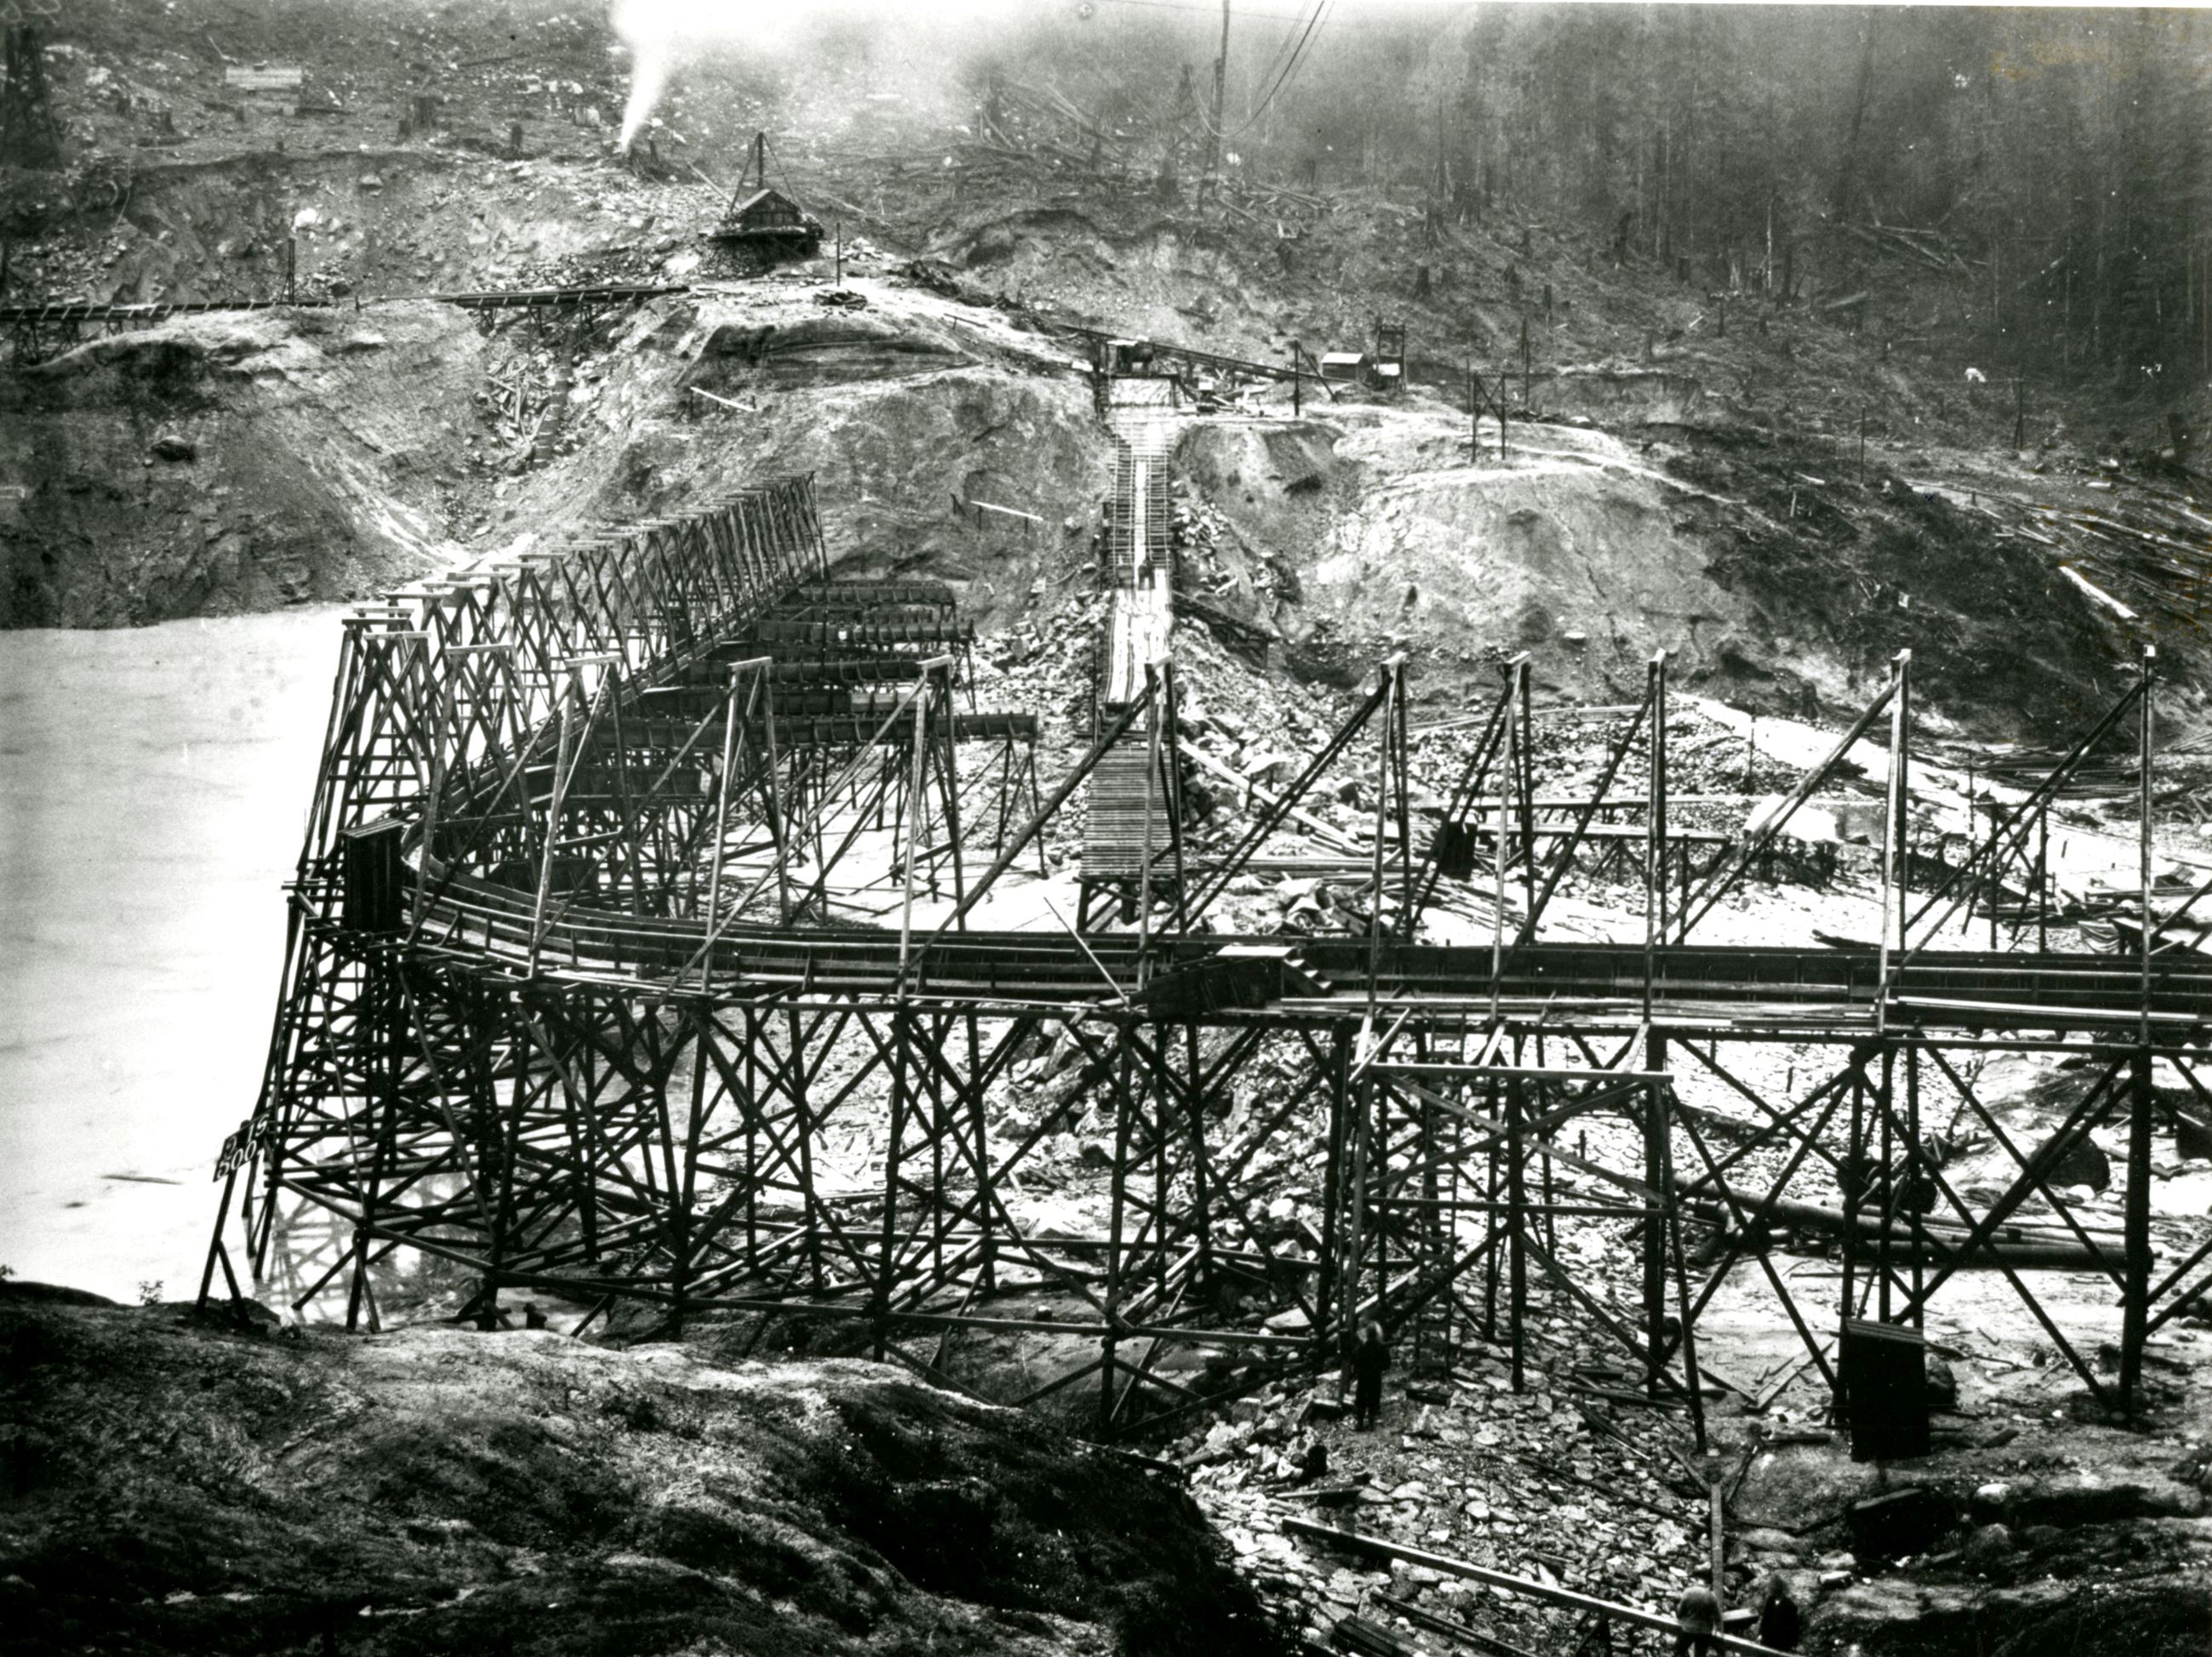 Construction of the Coquitlam Dam (City of Coquitlam Archives, C6.1075)